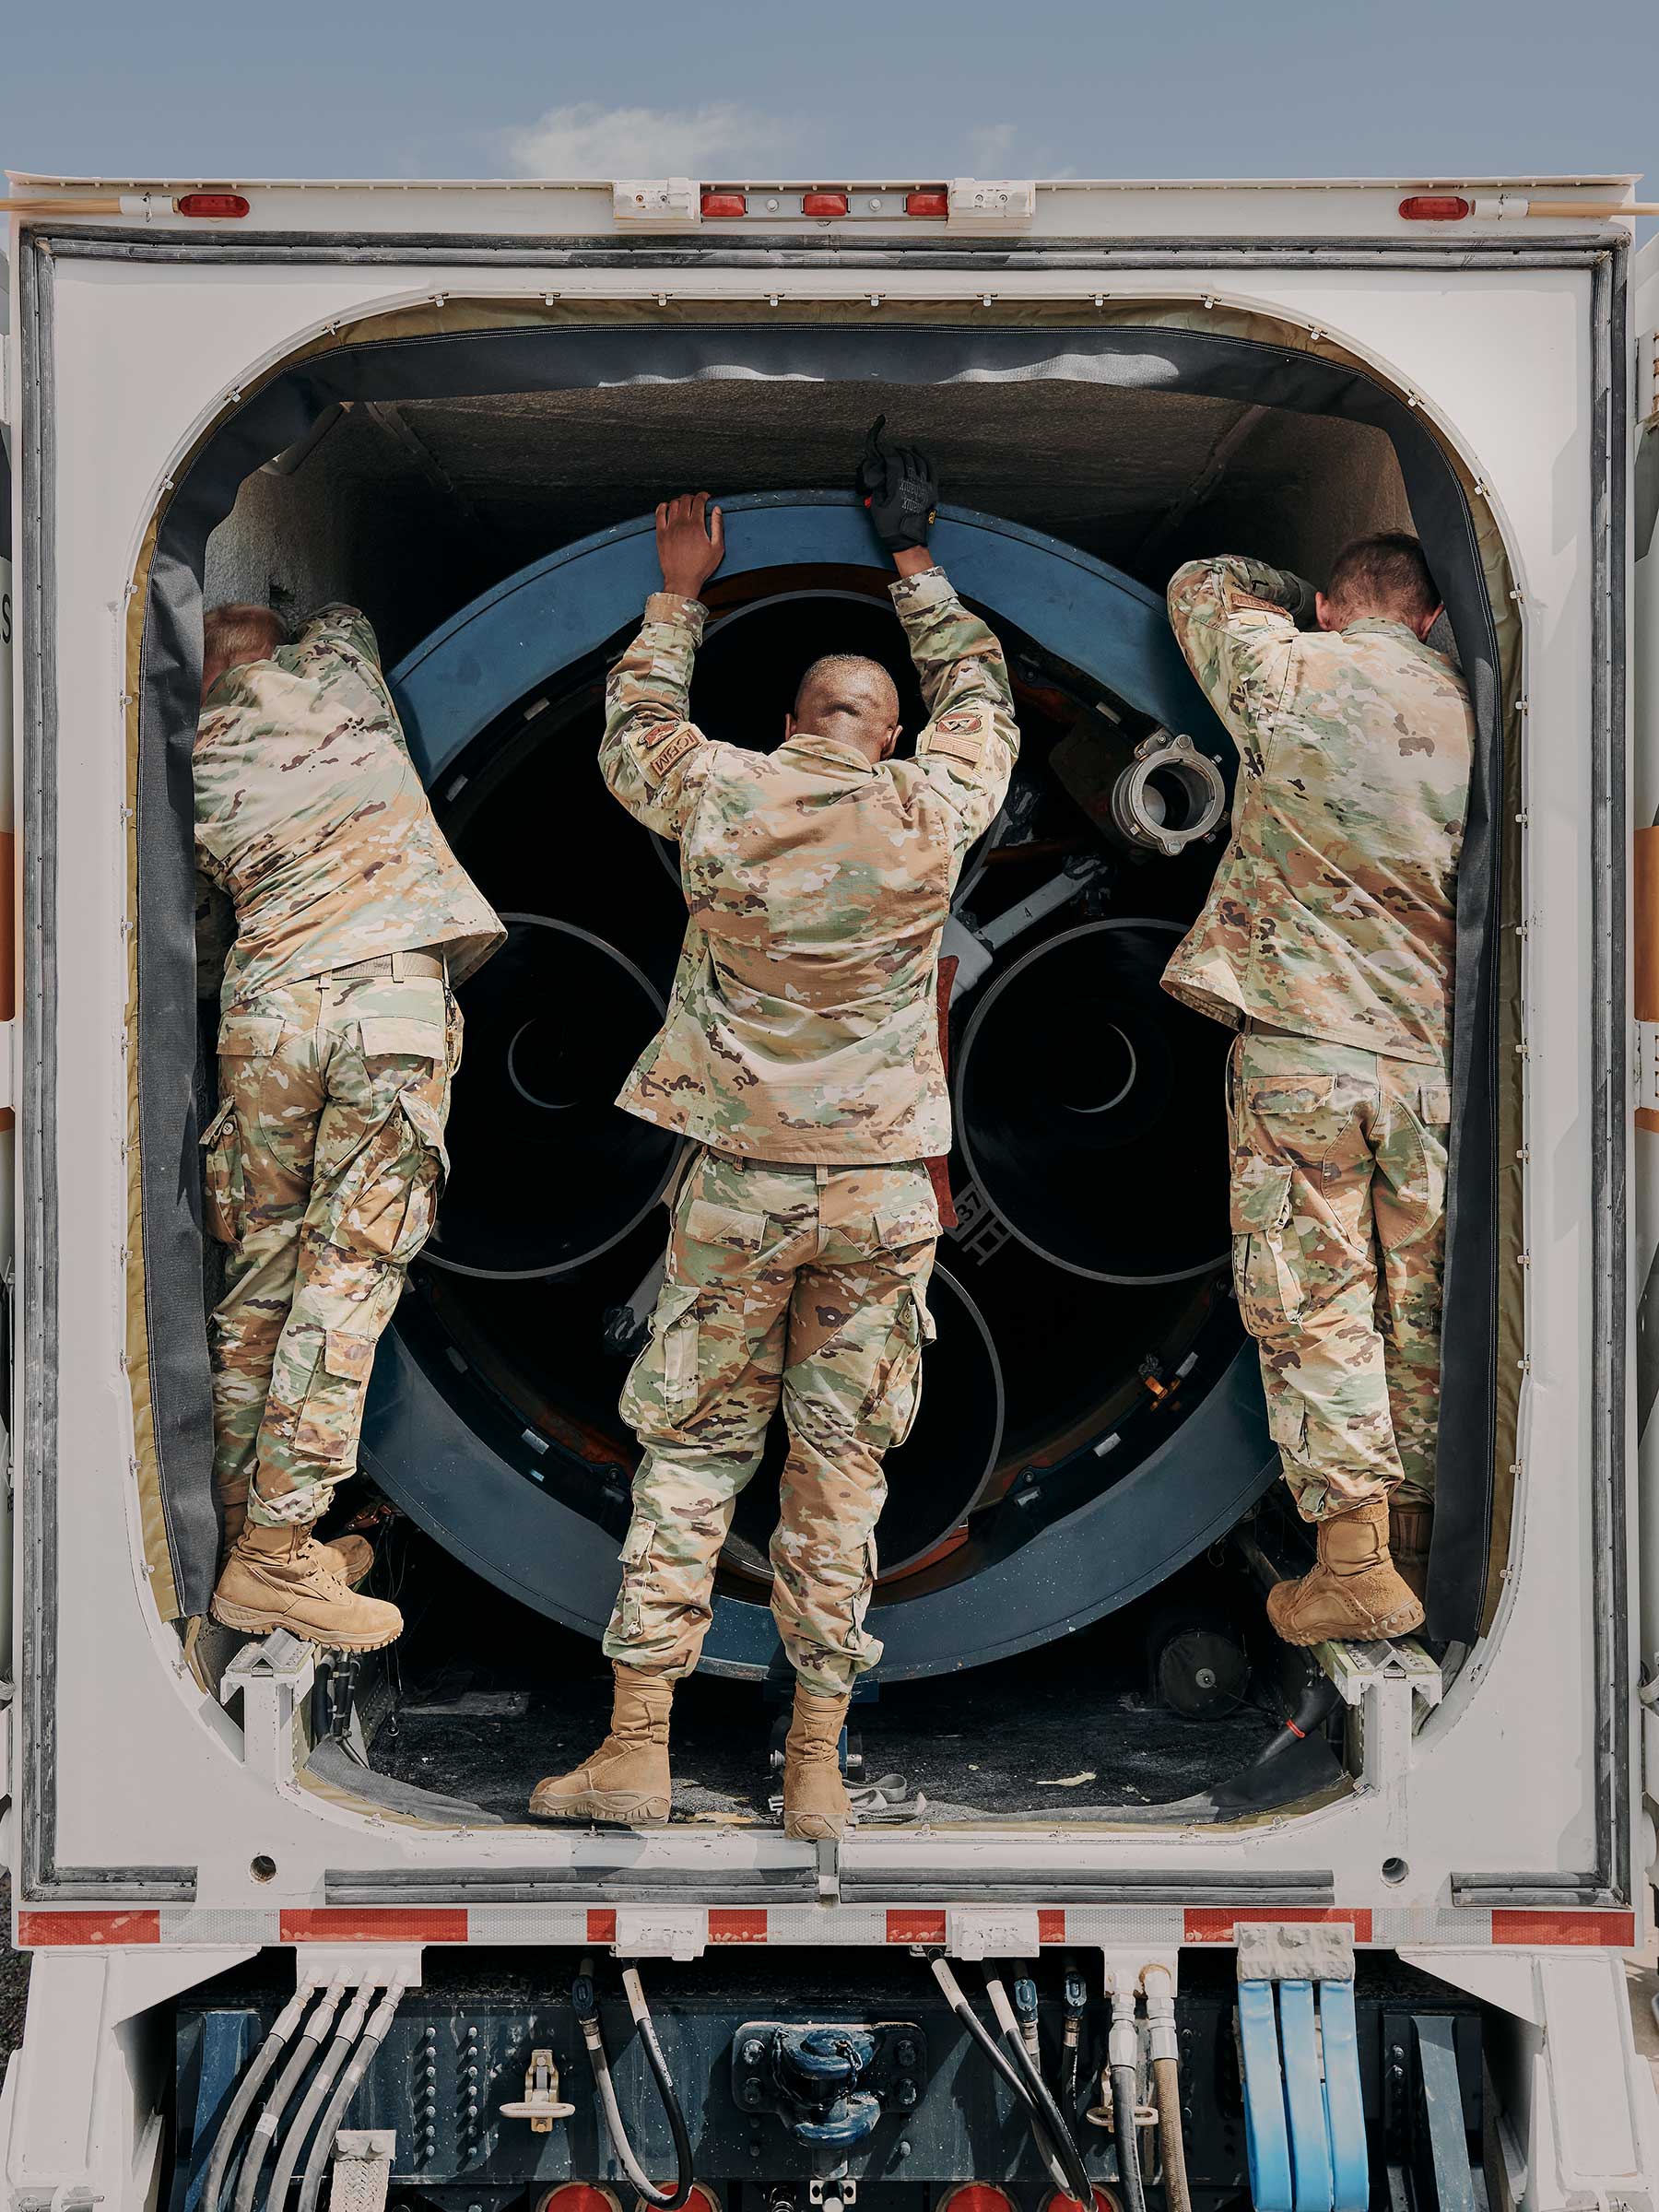 Soldiers prepare a <a href="https://time.com/6212698/nuclear-missiles-icbm-triad-upgrade/">Minuteman III</a>—a U.S. military intercontinental ballistic missile—to be lowered into the silo on July 19. It is part of a $100 billion plan to modernize America's aging nuclear missile system. (Benjamin Rasmussen for TIME)